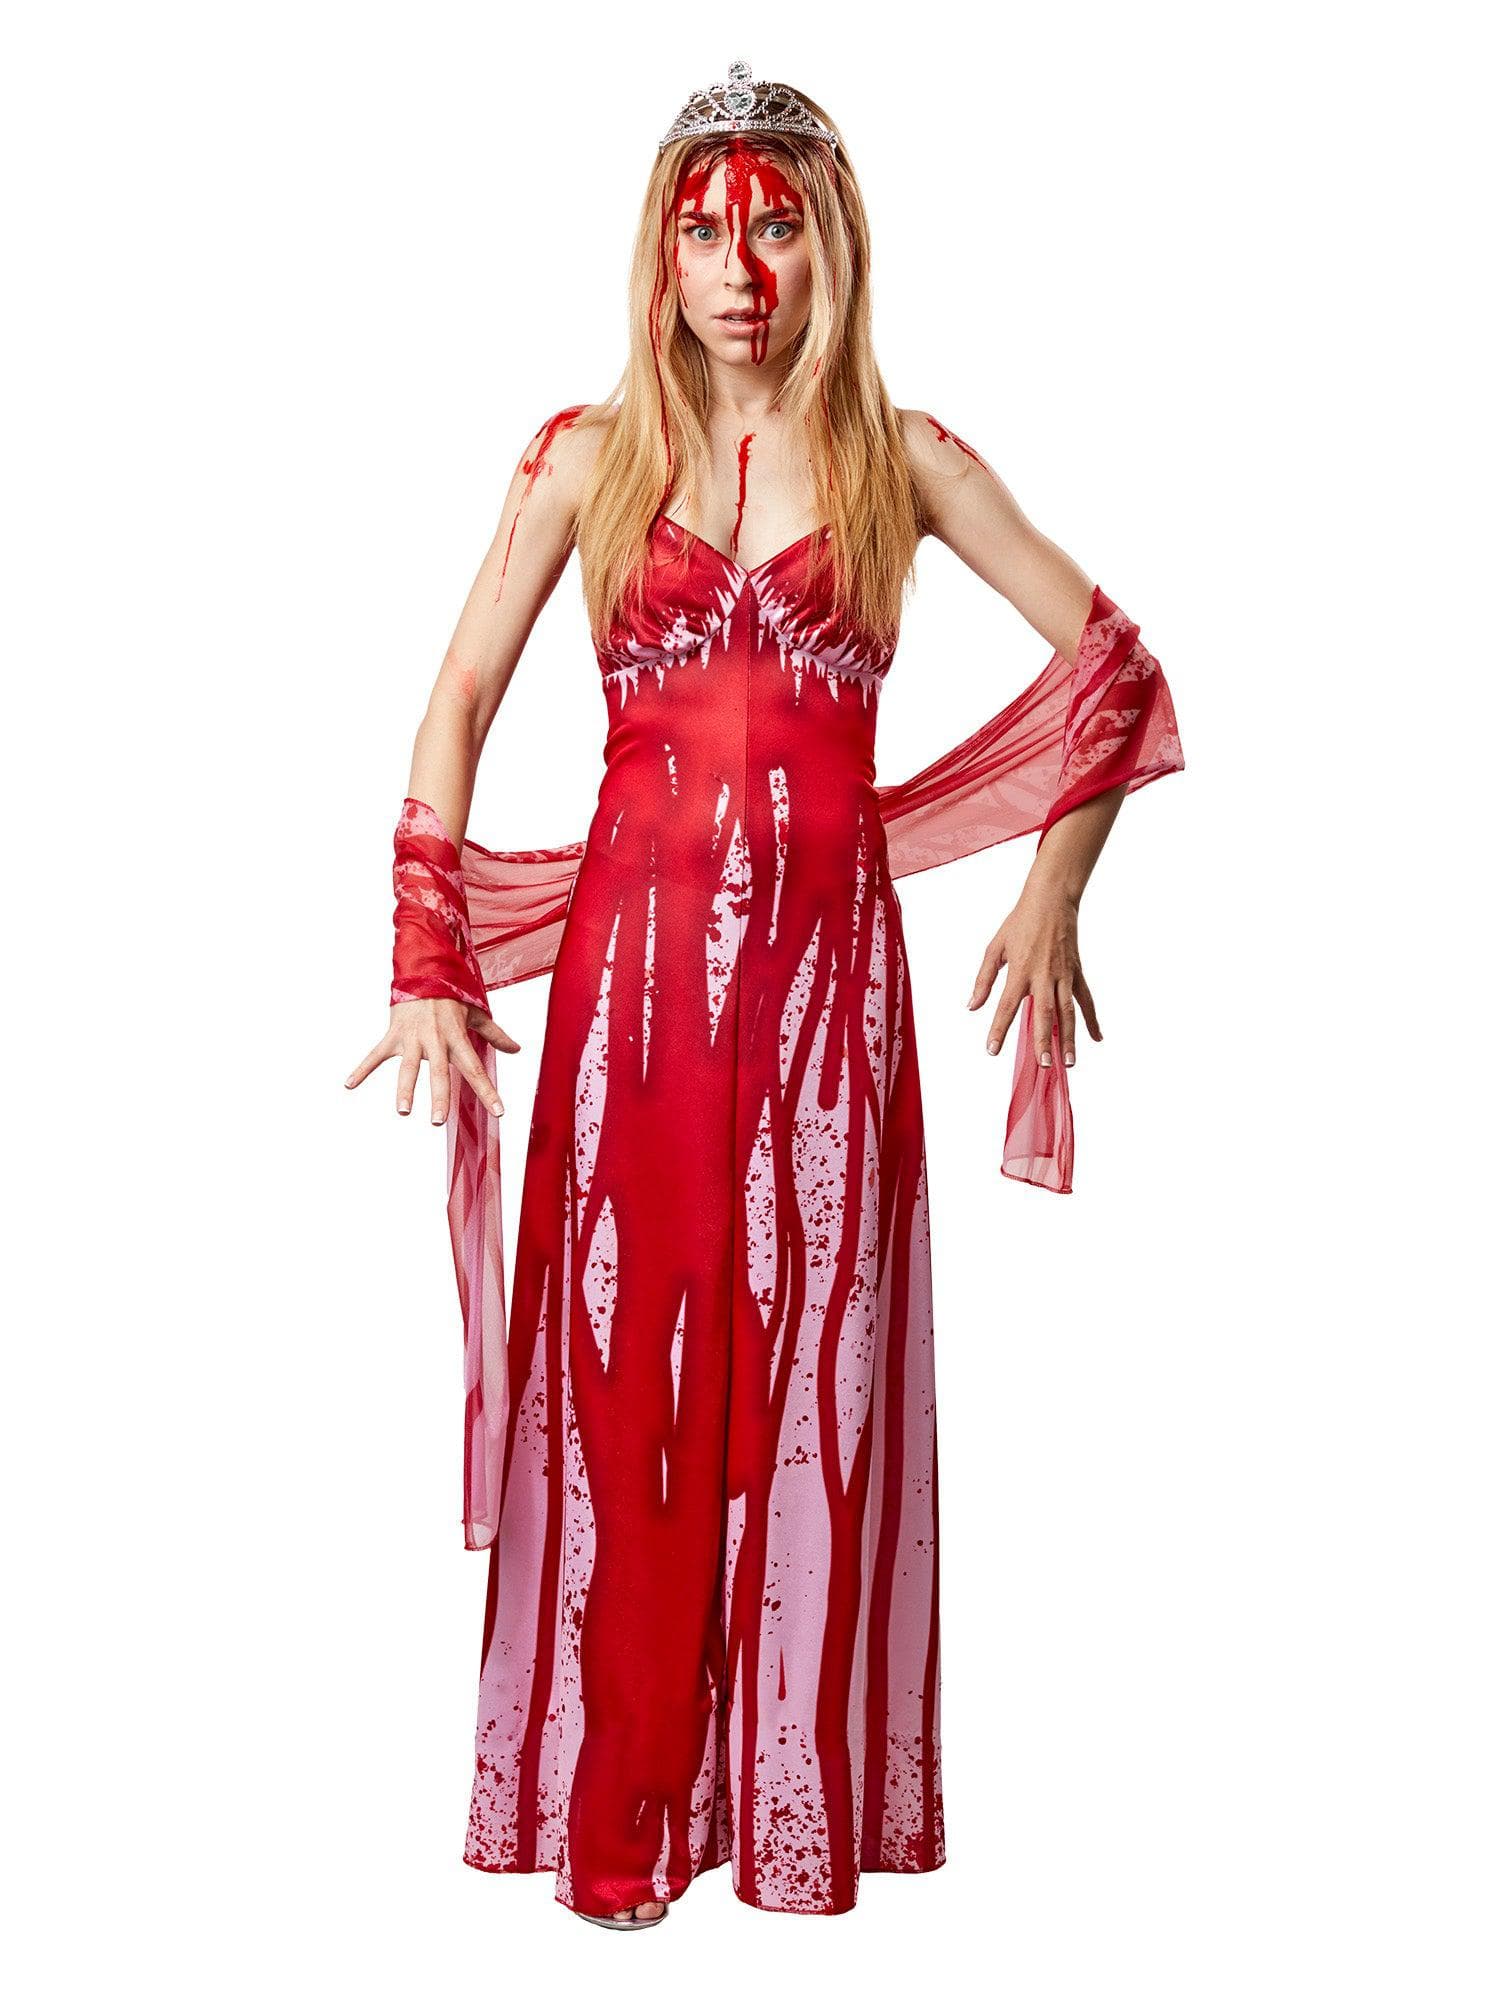 Women's 1976 Carrie Bloody Prom Costume - costumes.com